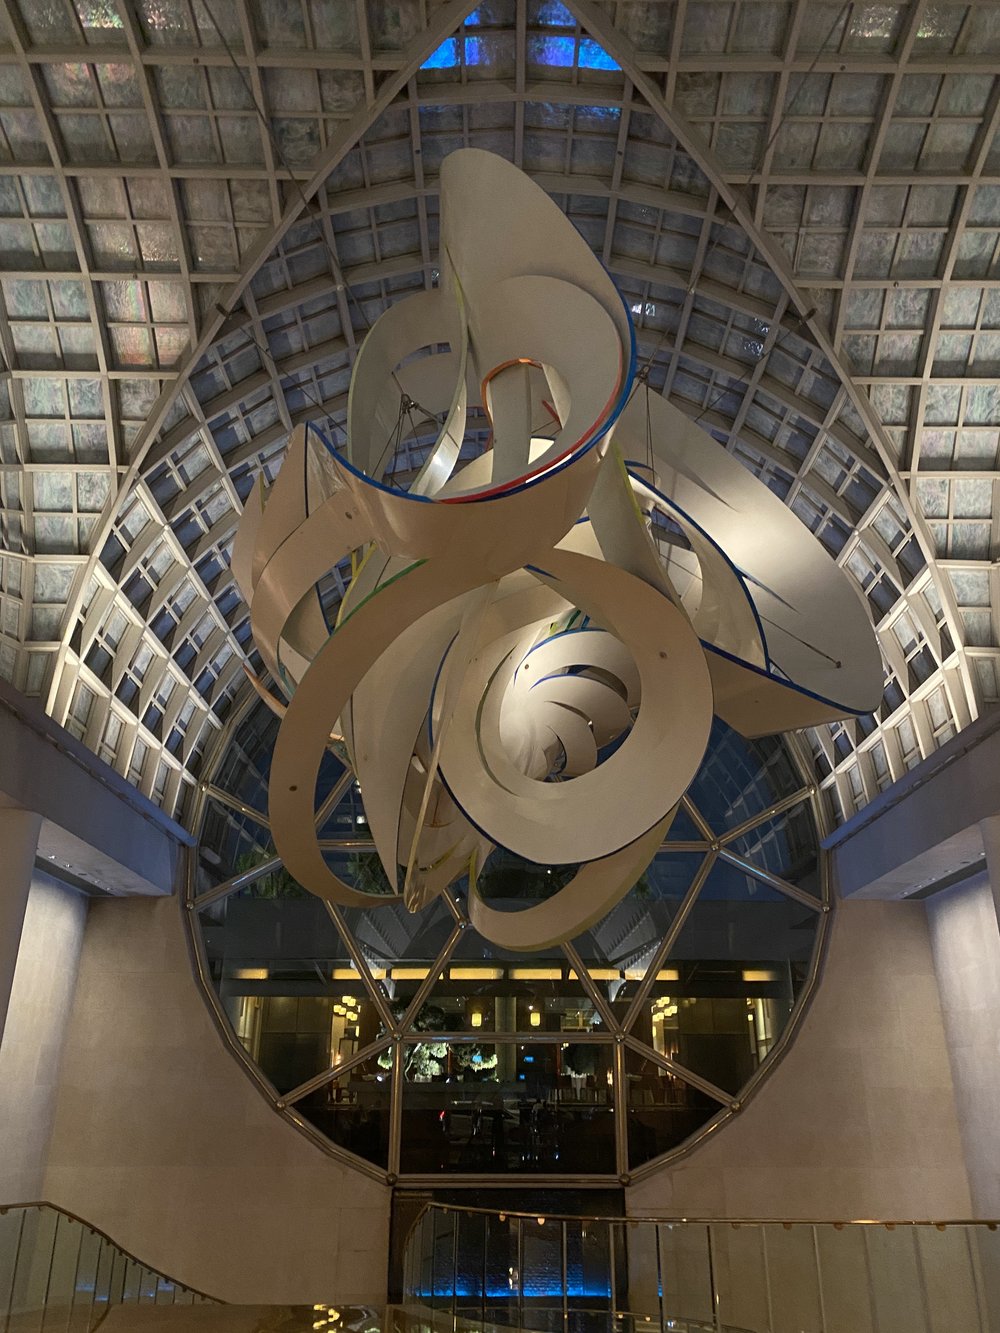 %22Cornucopia%22 by Frank Stella framed by the mother-of-pear glass ceiling.JPG